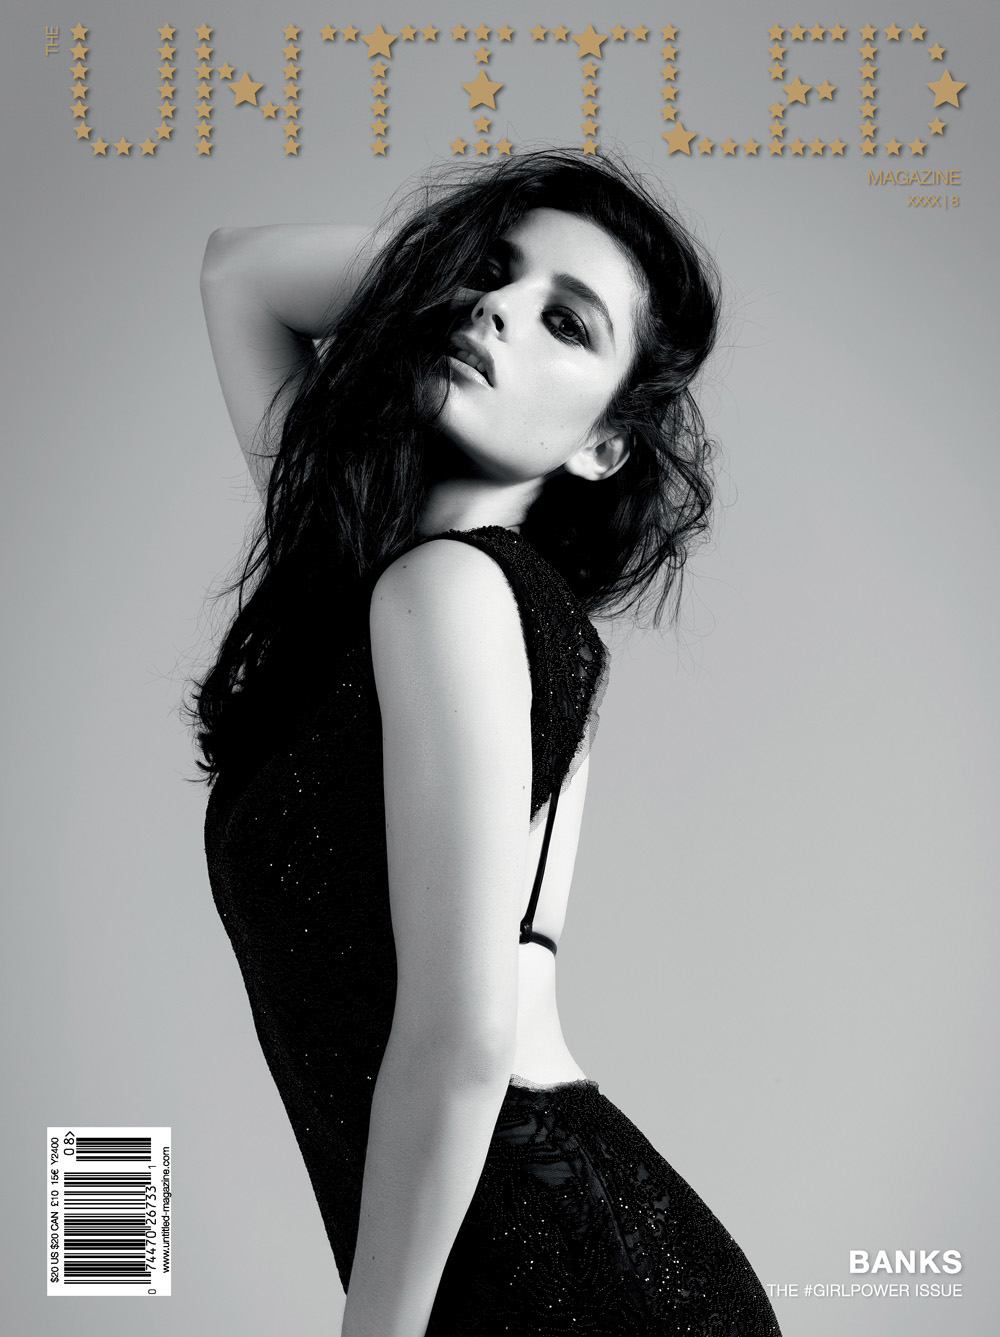 The-Untitled-Magazine-Issue-8-Banks-Cover-Highres-lr.jpg